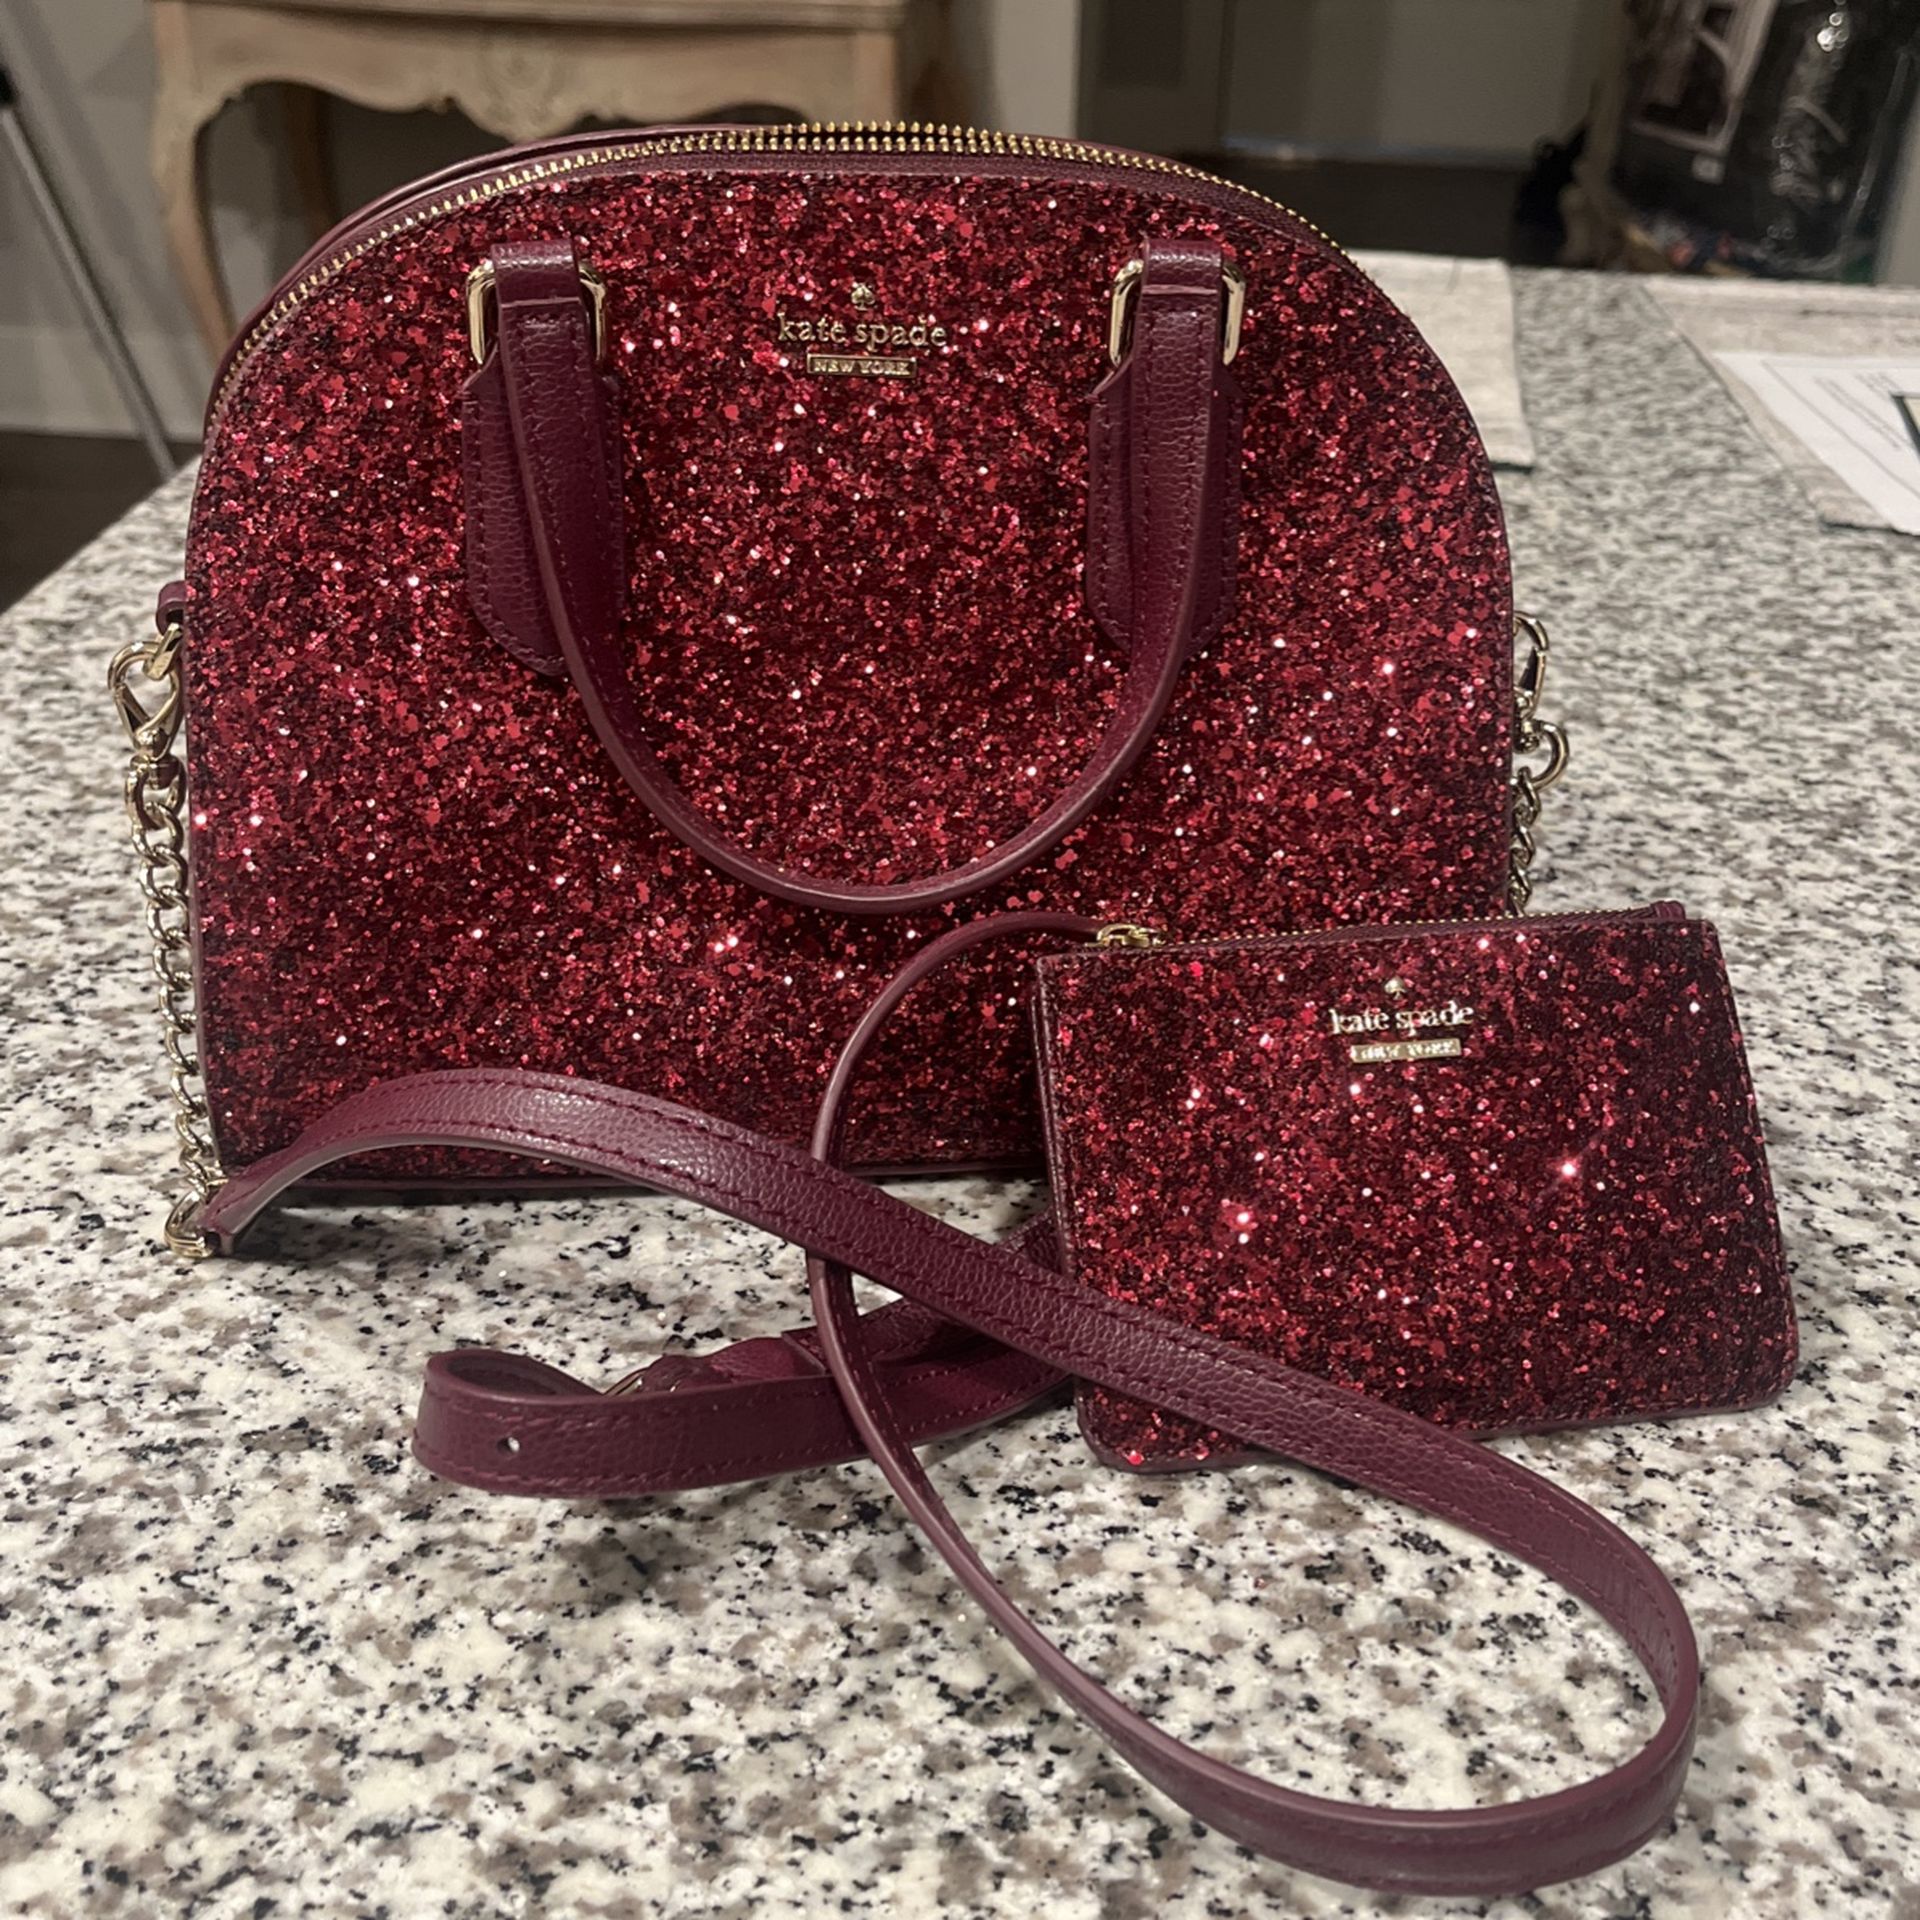 Glitter Kate Spade Purse With Wallet